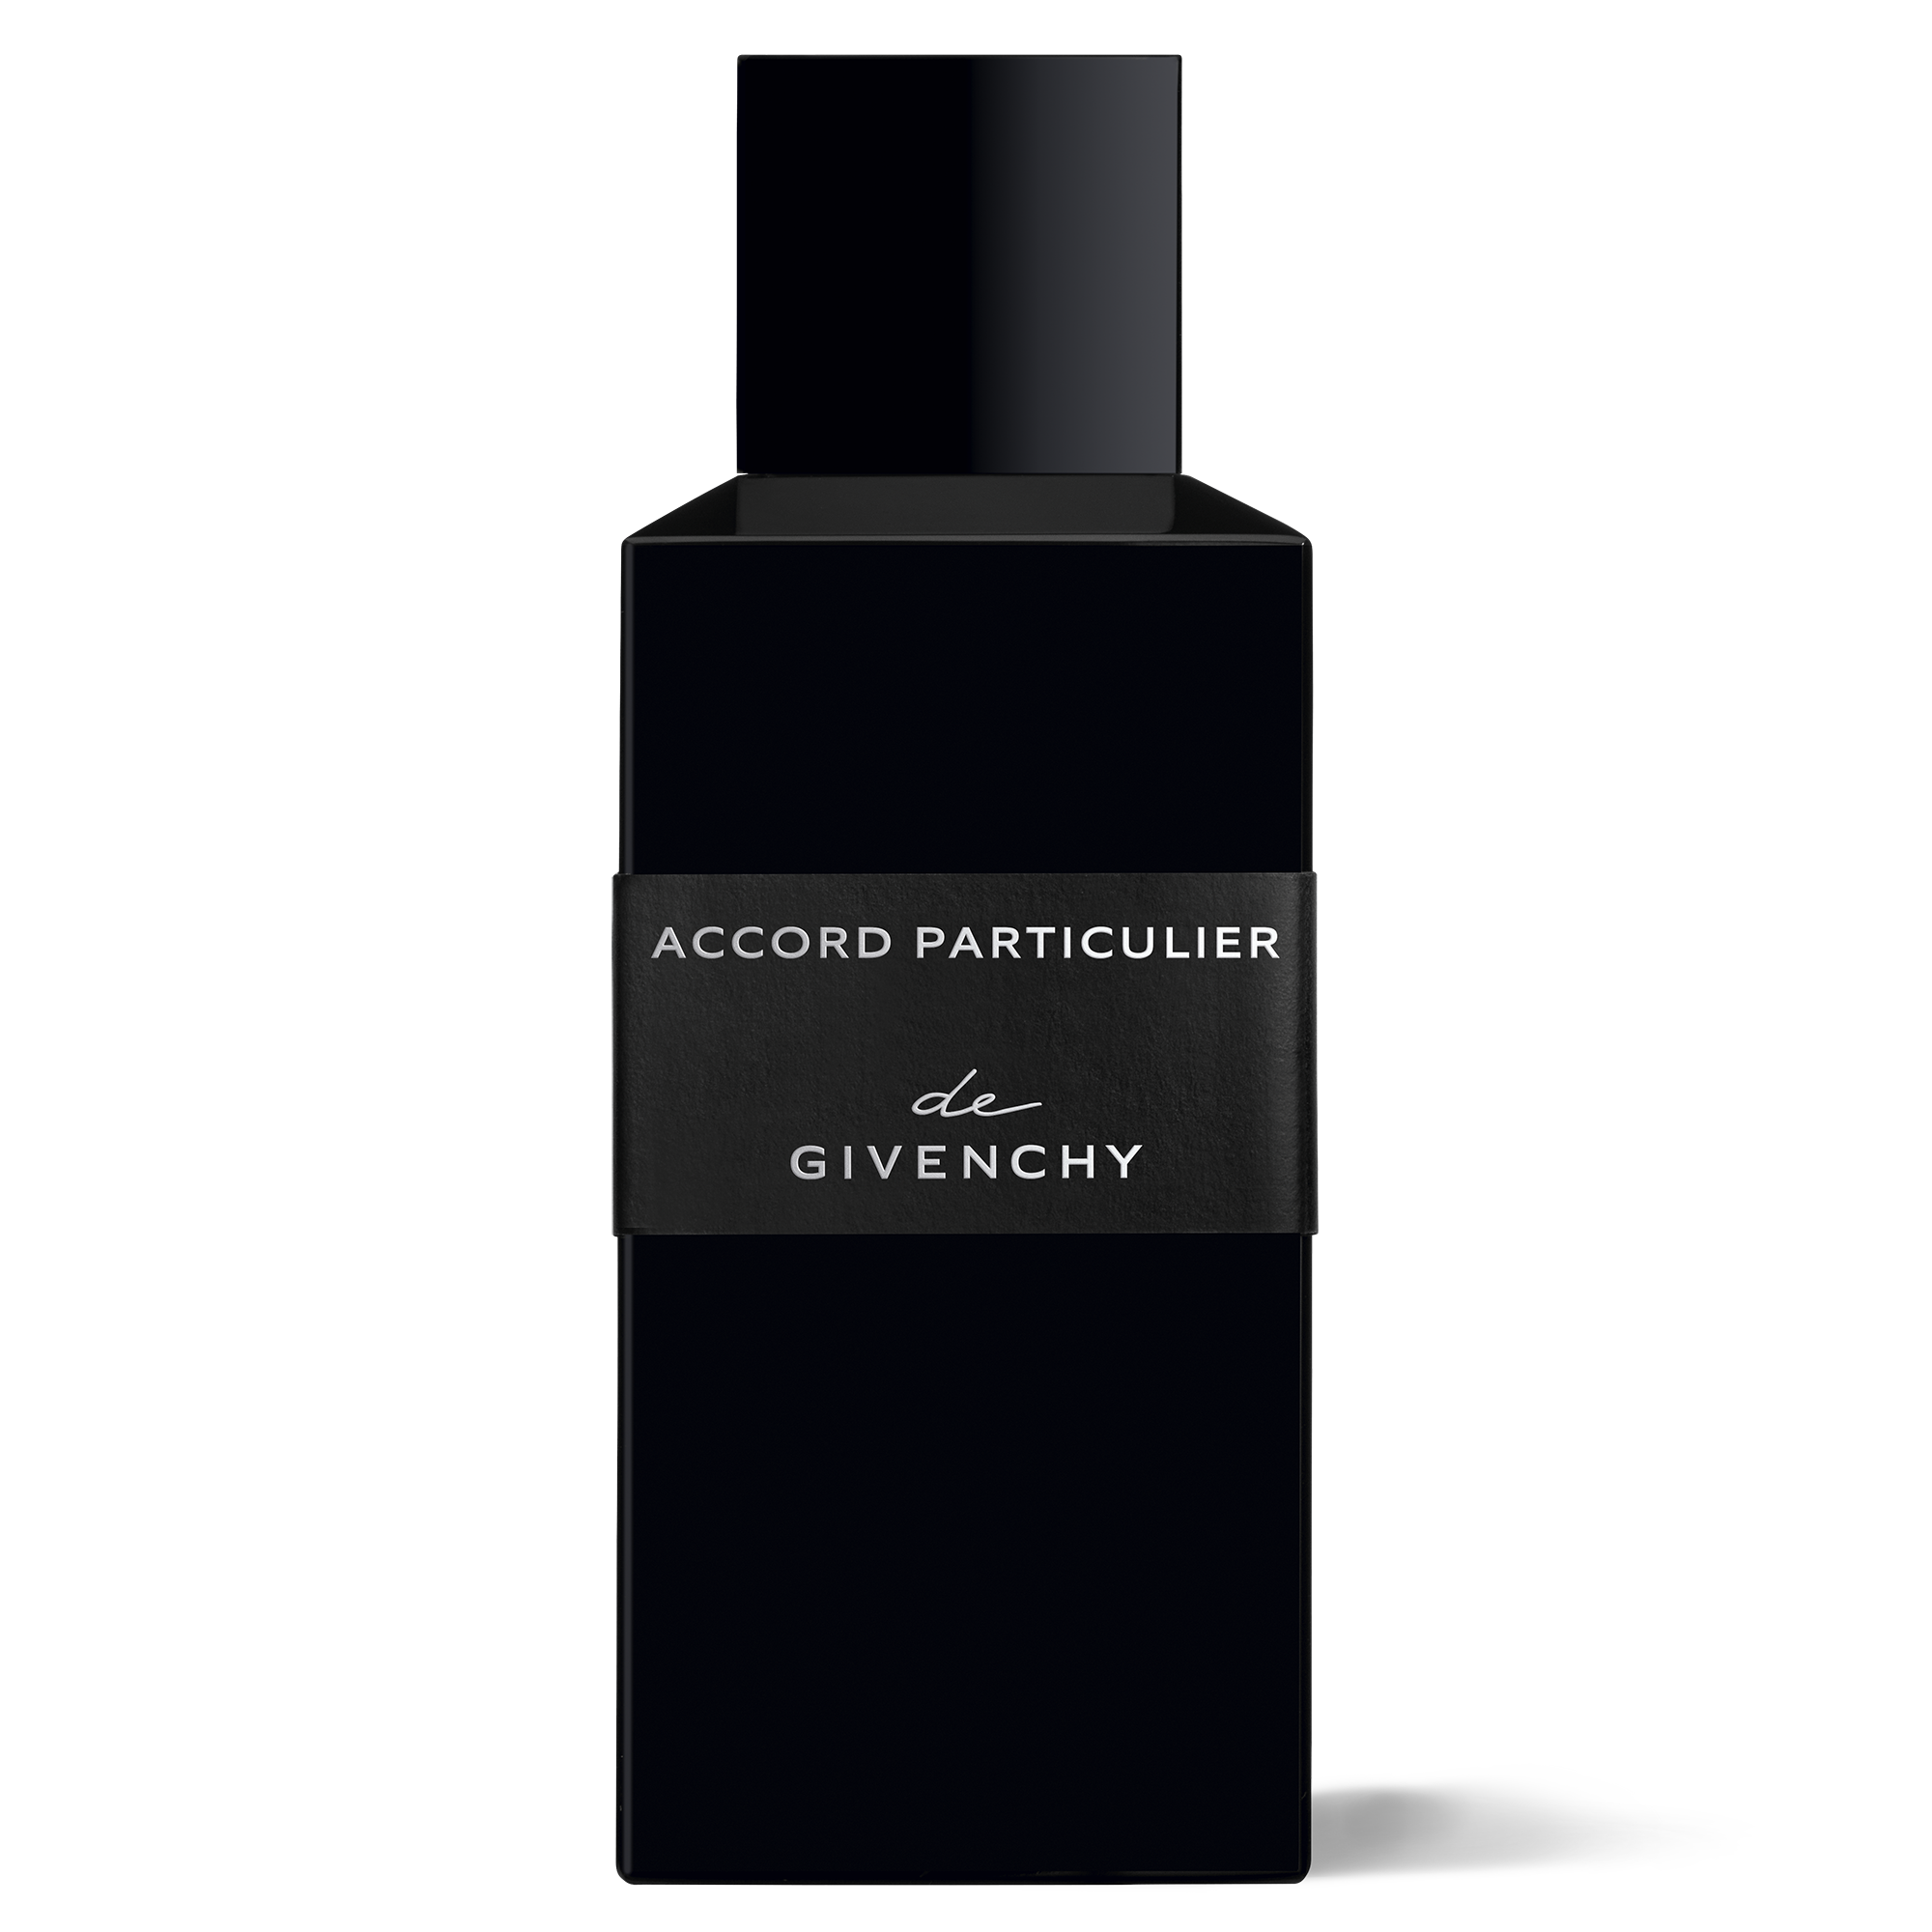 Accord Particulier ∷ GIVENCHY